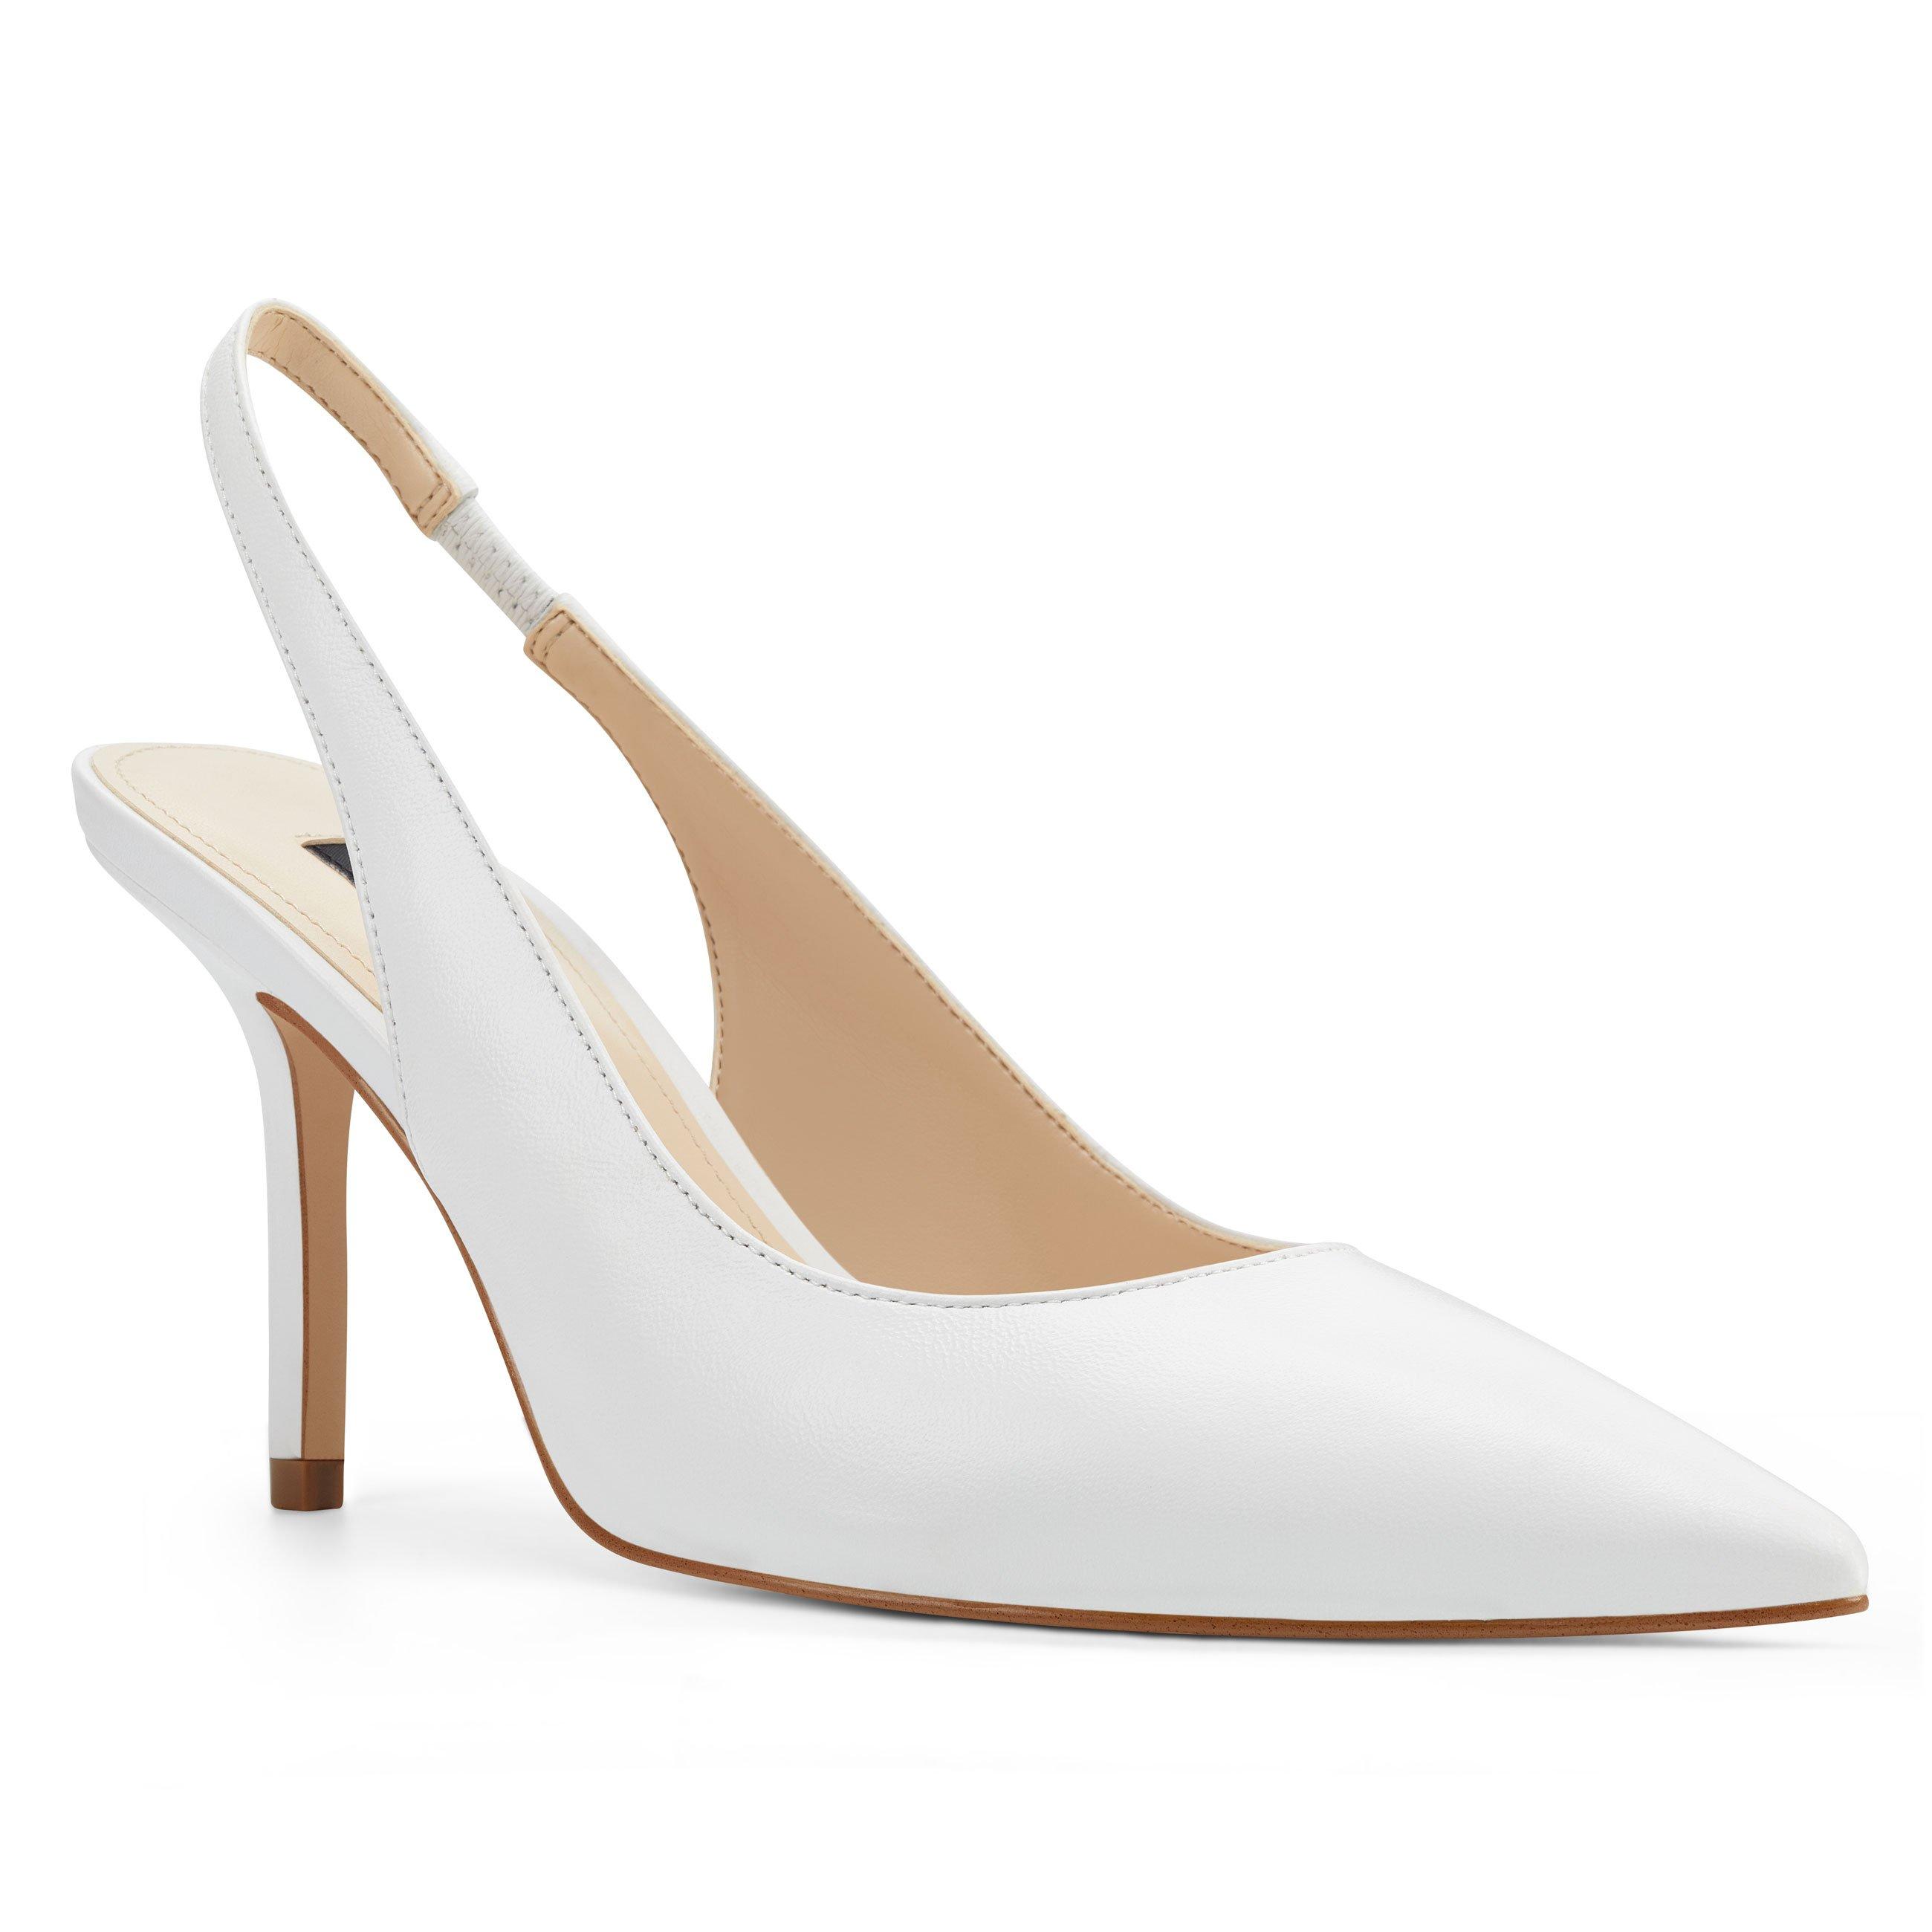 Nine West Holly Slingback Pumps in White Leather (White) - Lyst